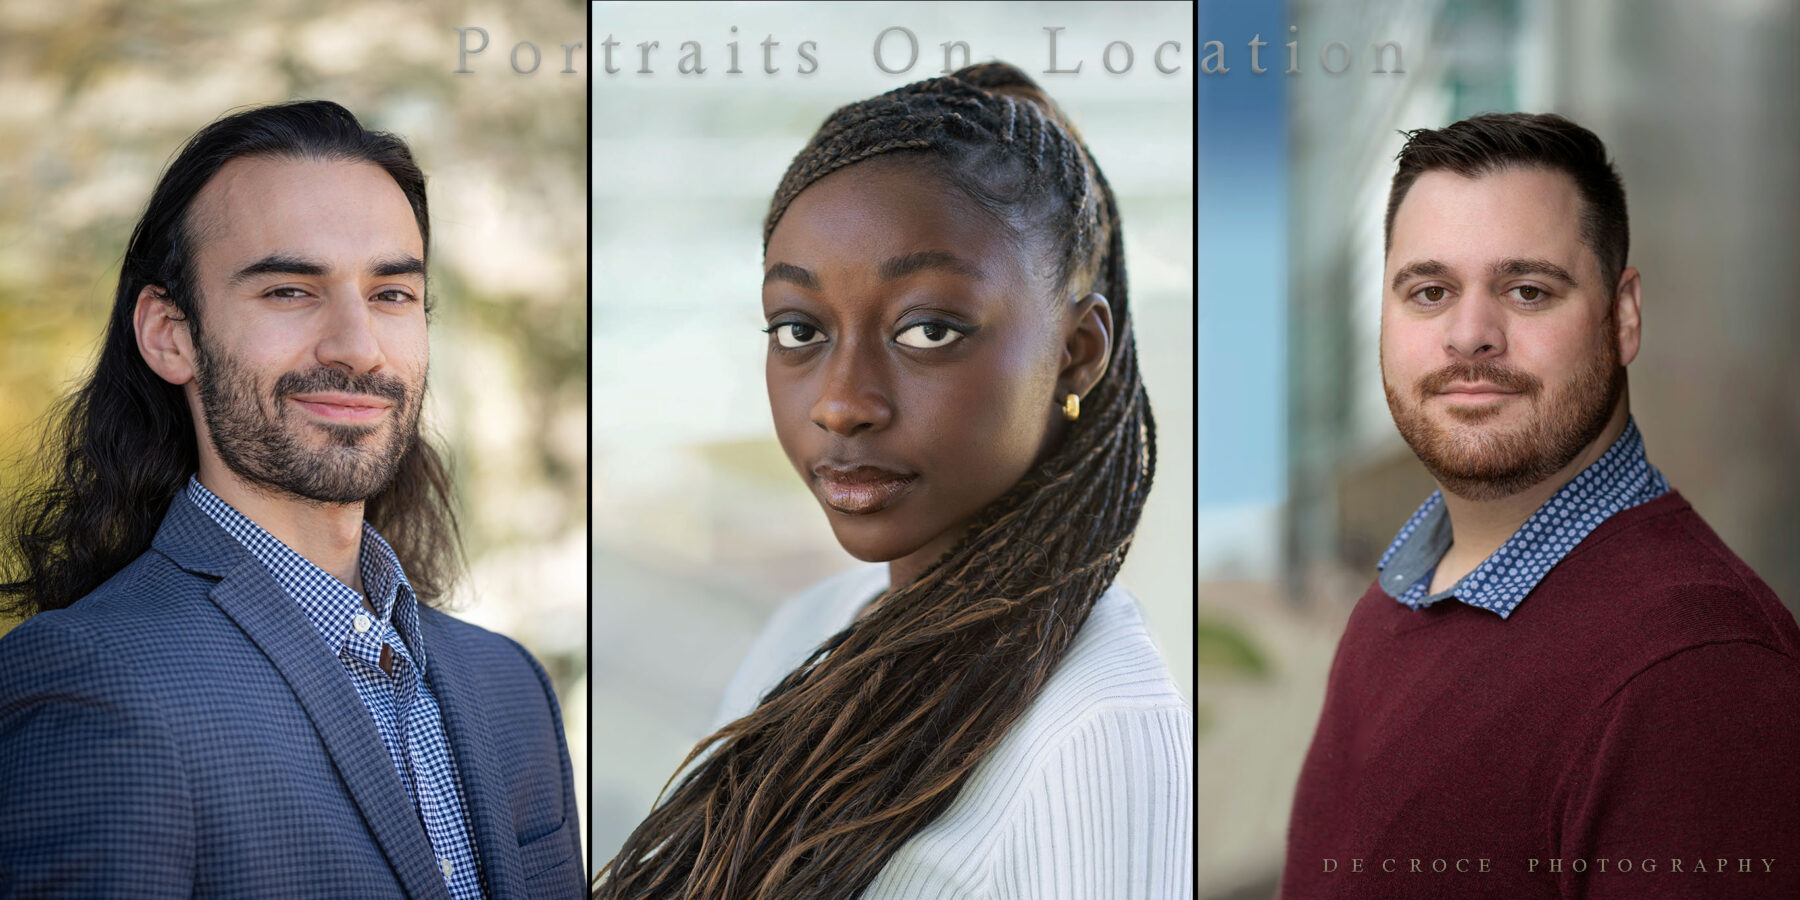 Photographer for professional portraits create stunning portraits for marketing.